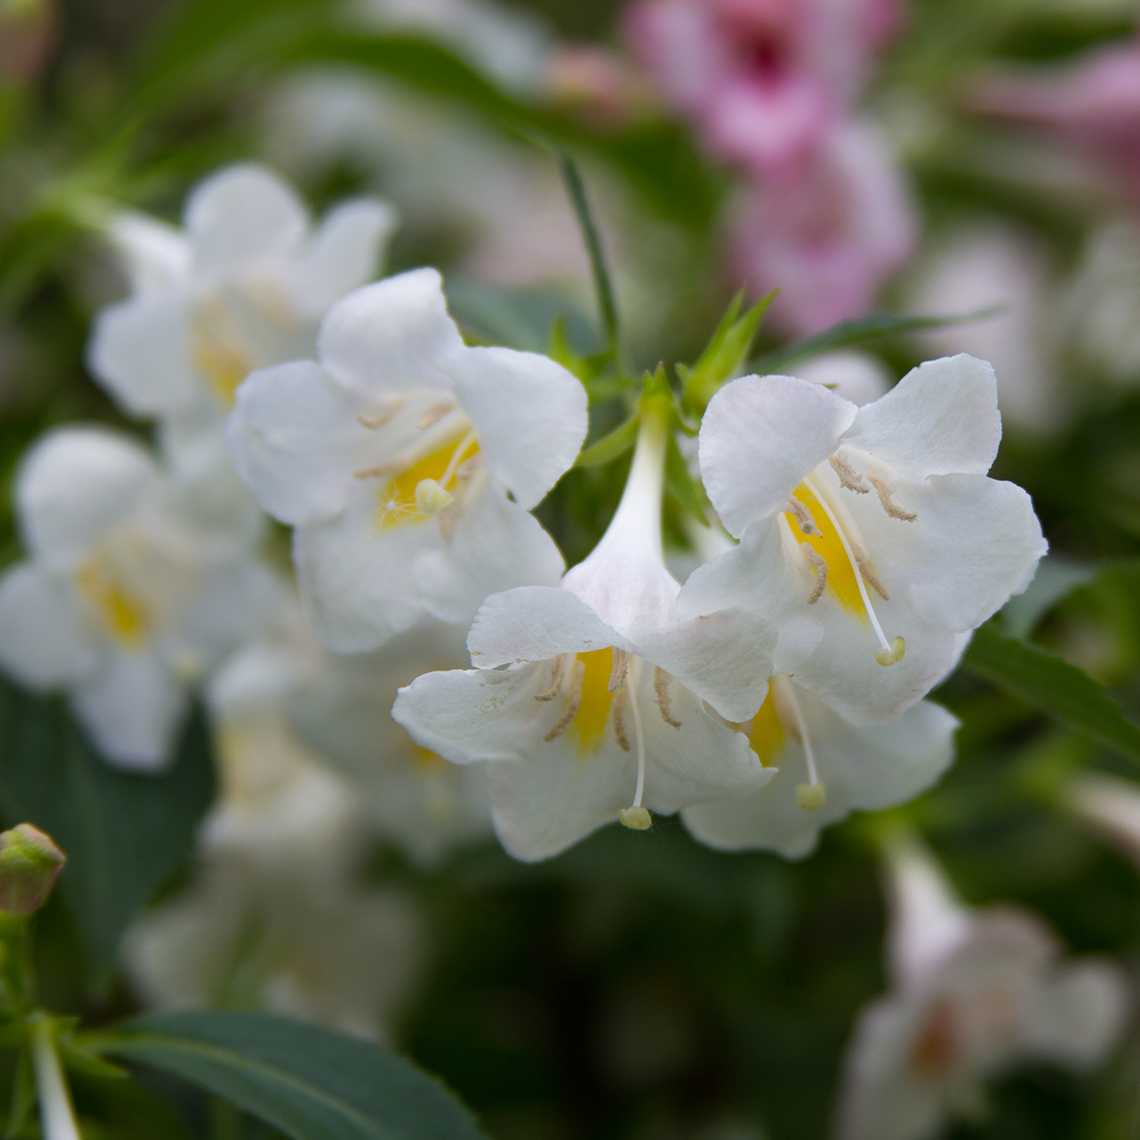 Closeup of the white and yellow flowers of Sonic Bloom Pearl weigela